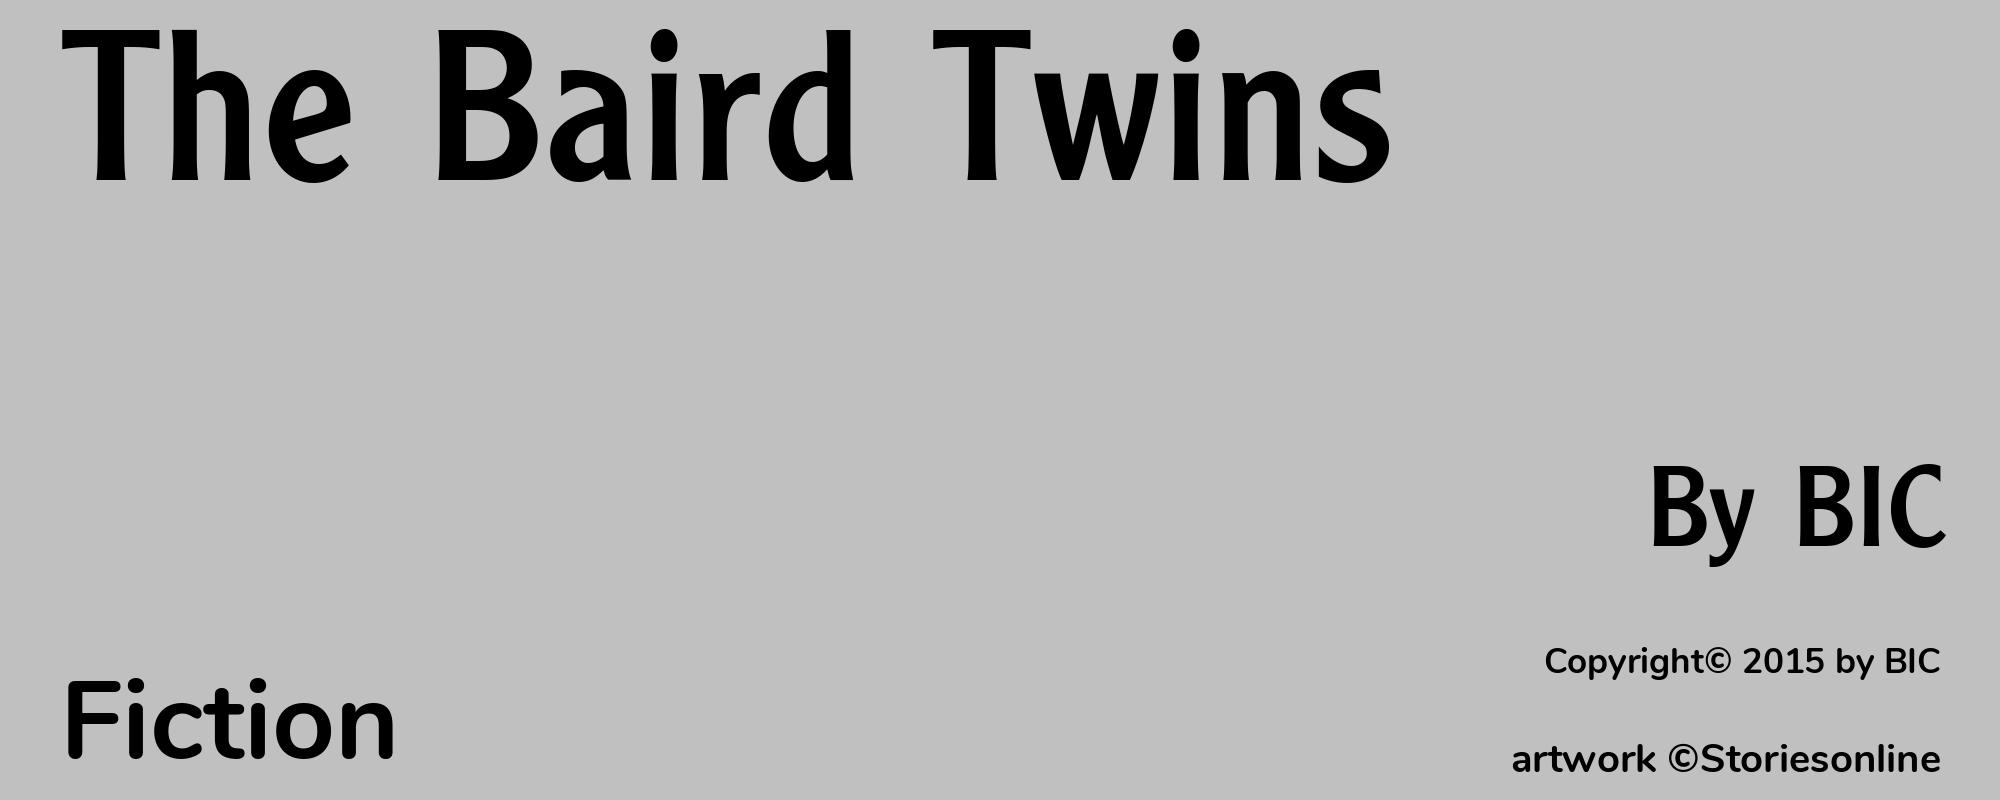 The Baird Twins - Cover